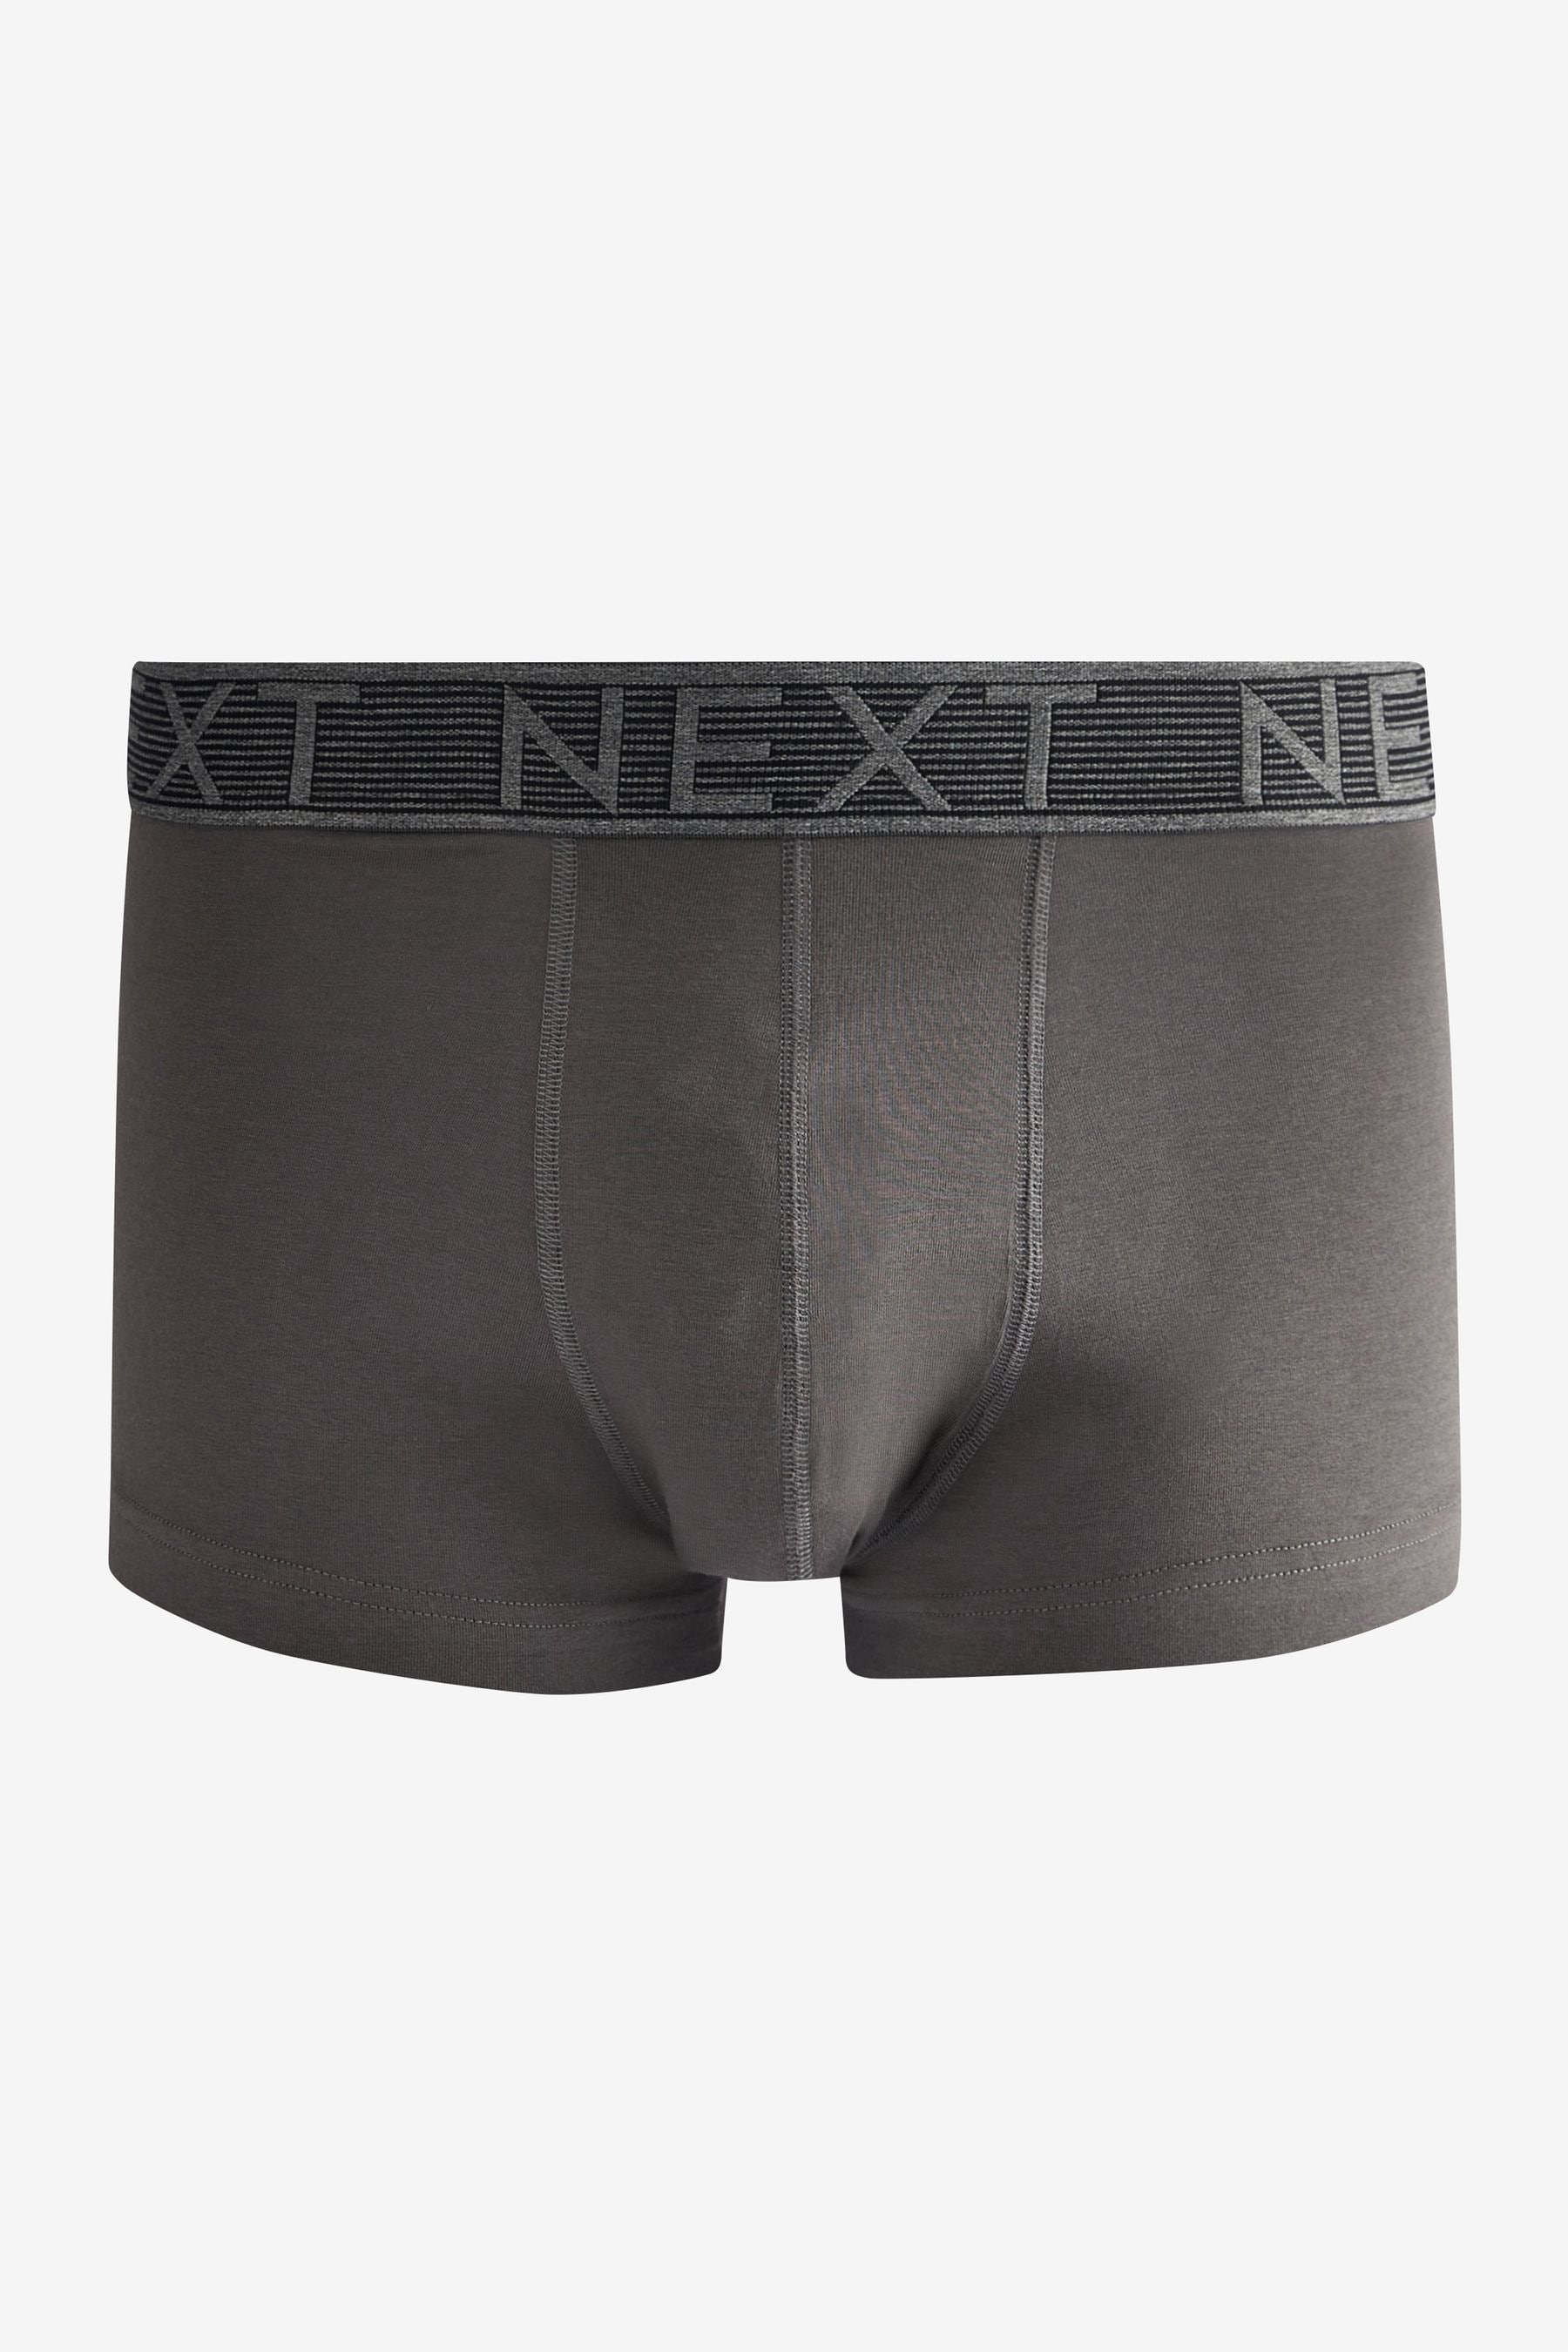 Buy Hipster Boxers 10 Pack from Next Australia